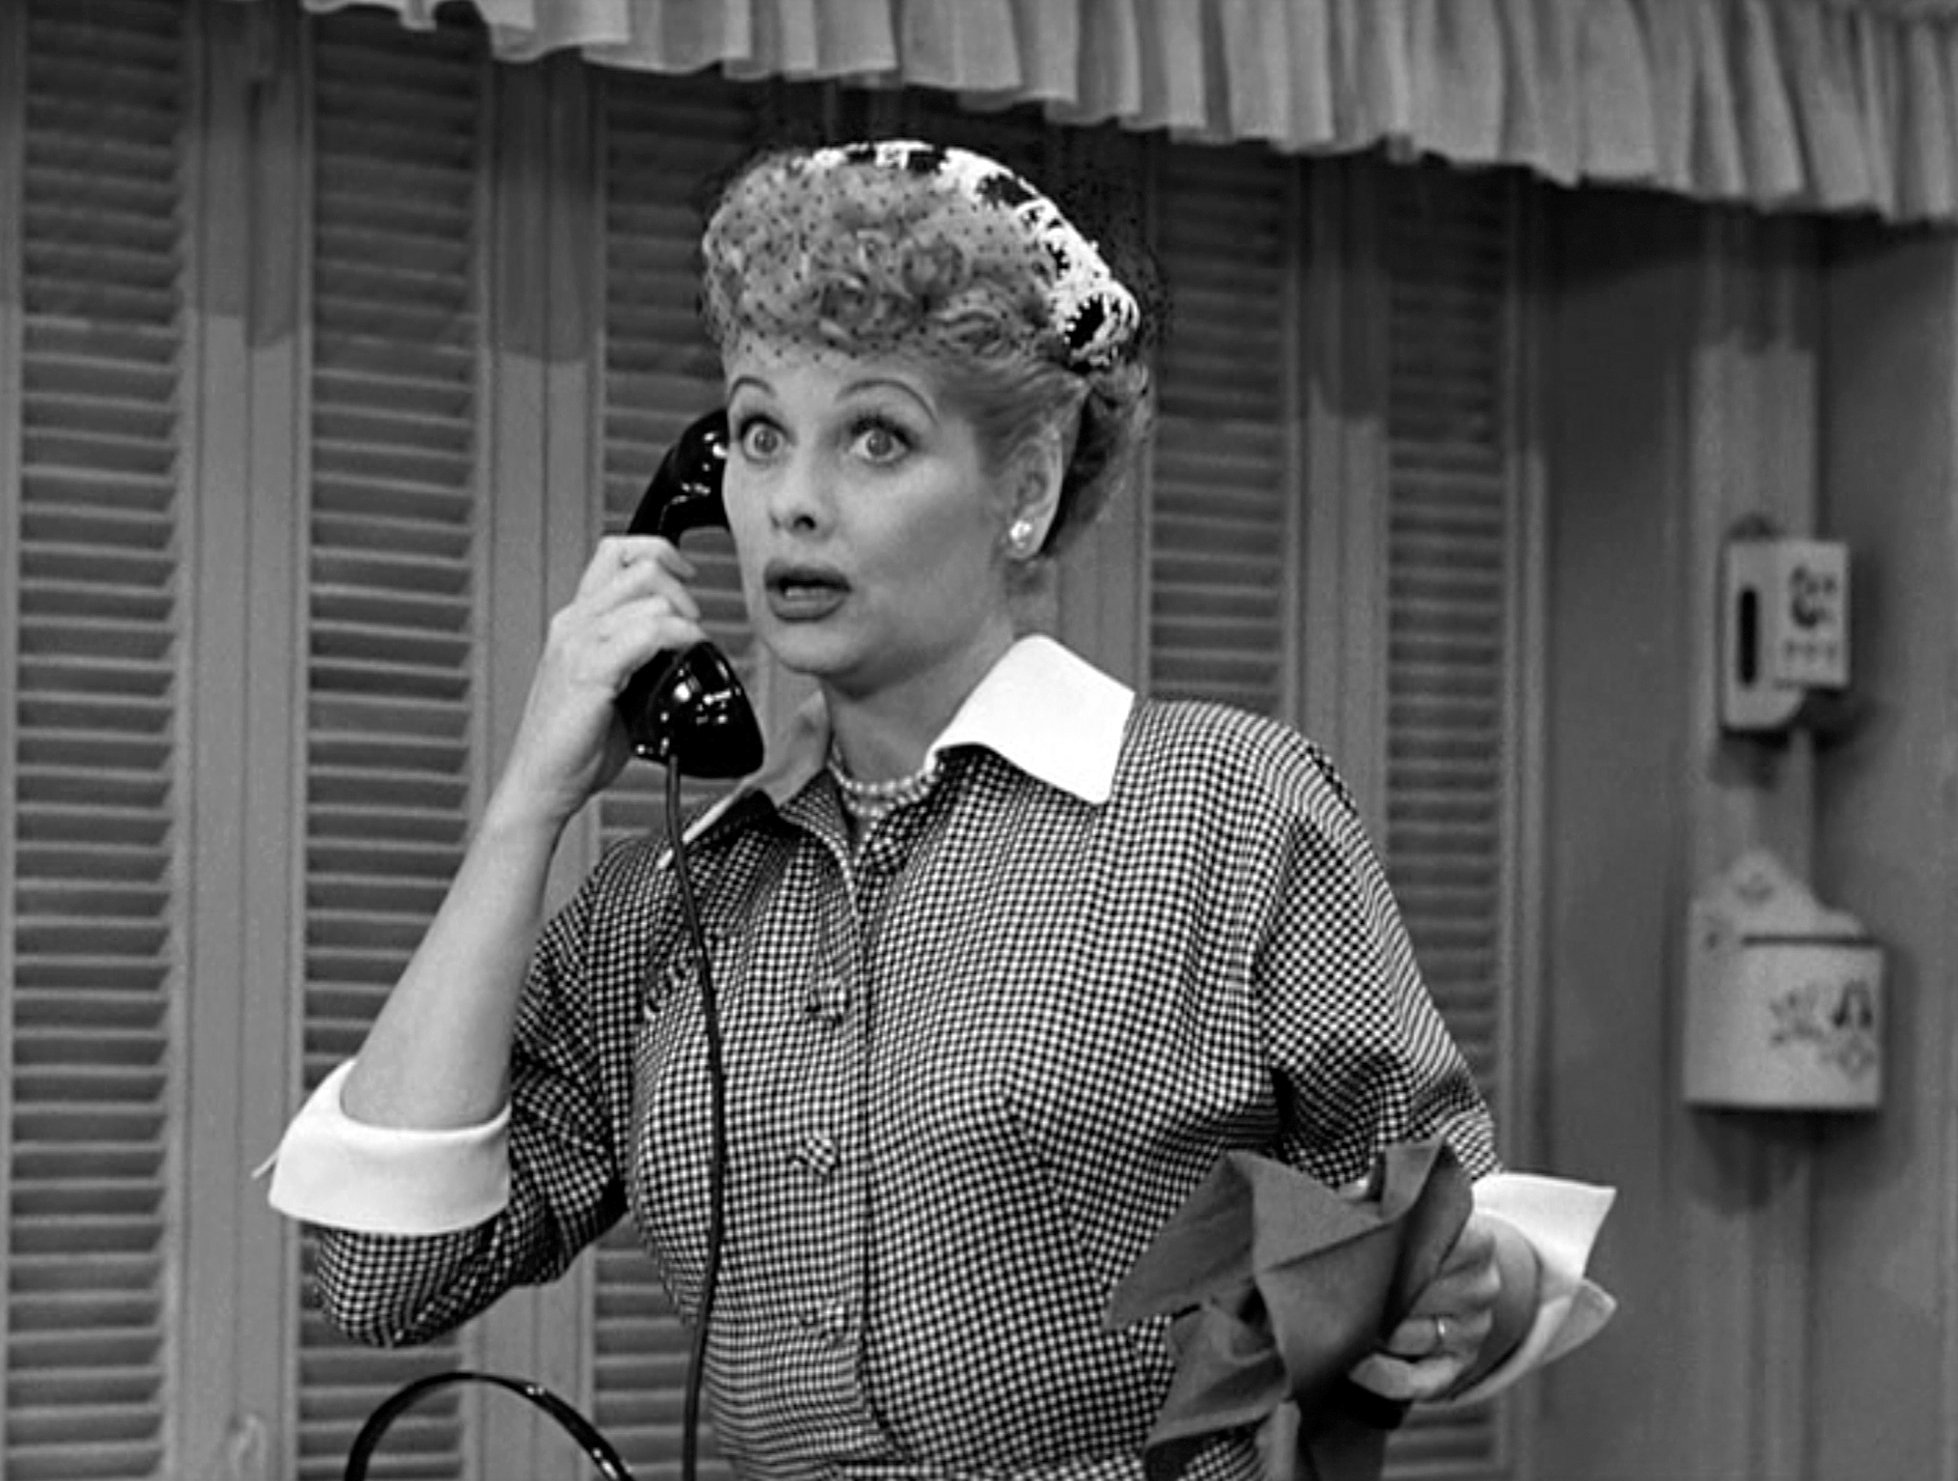 Nicole Kidman Wasn’t the First Choice for the Lucille Ball Biopic